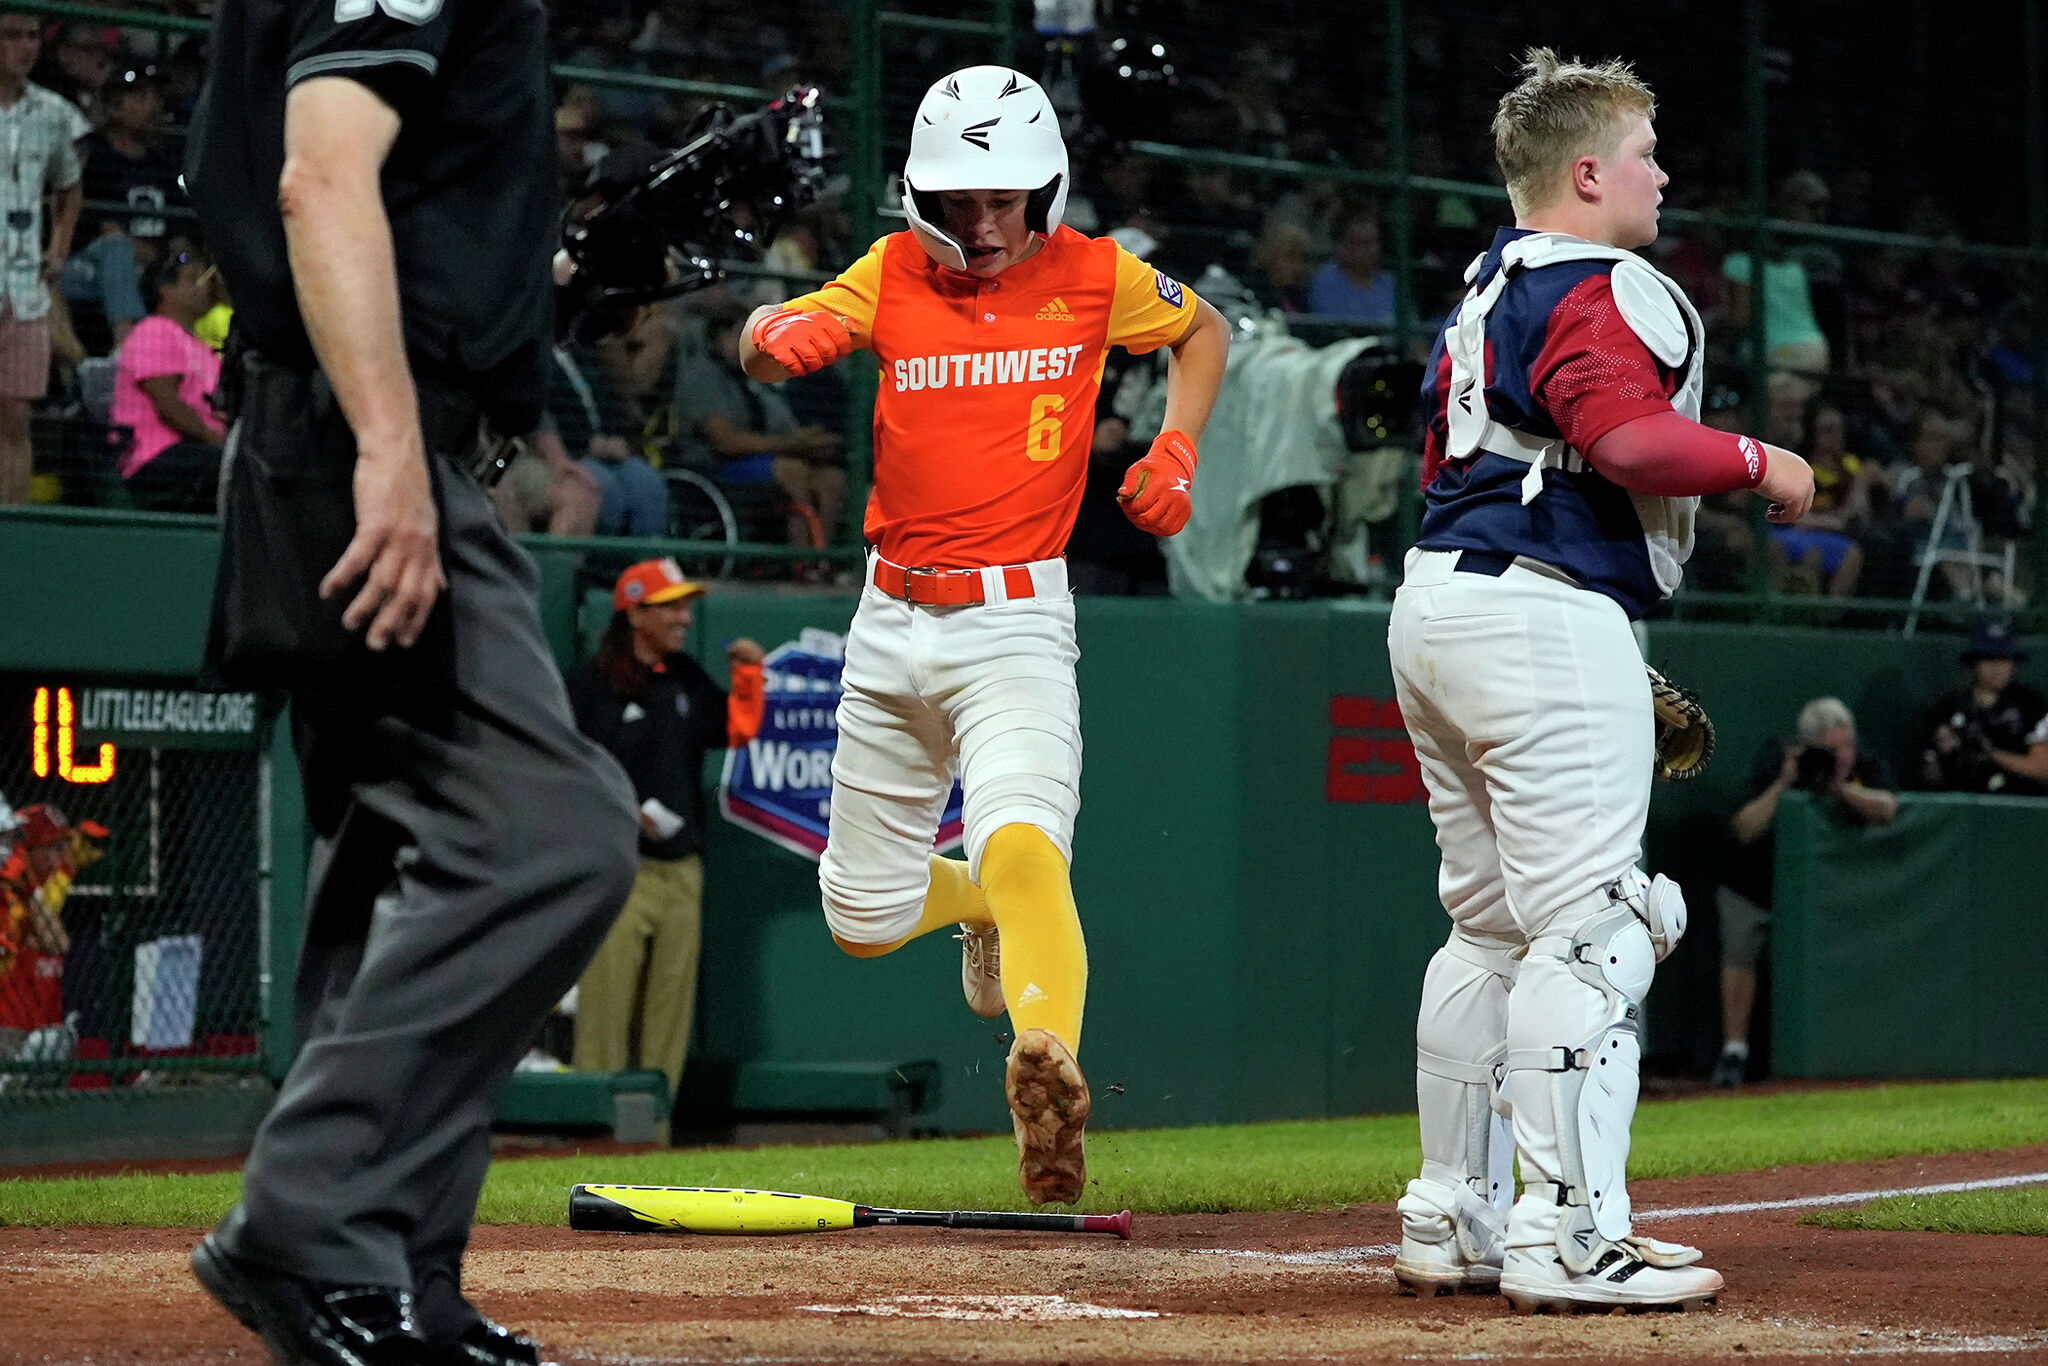 Meet the 20 Teams Competing in the 75th Anniversary of the Little League  Baseball World Series - Little League